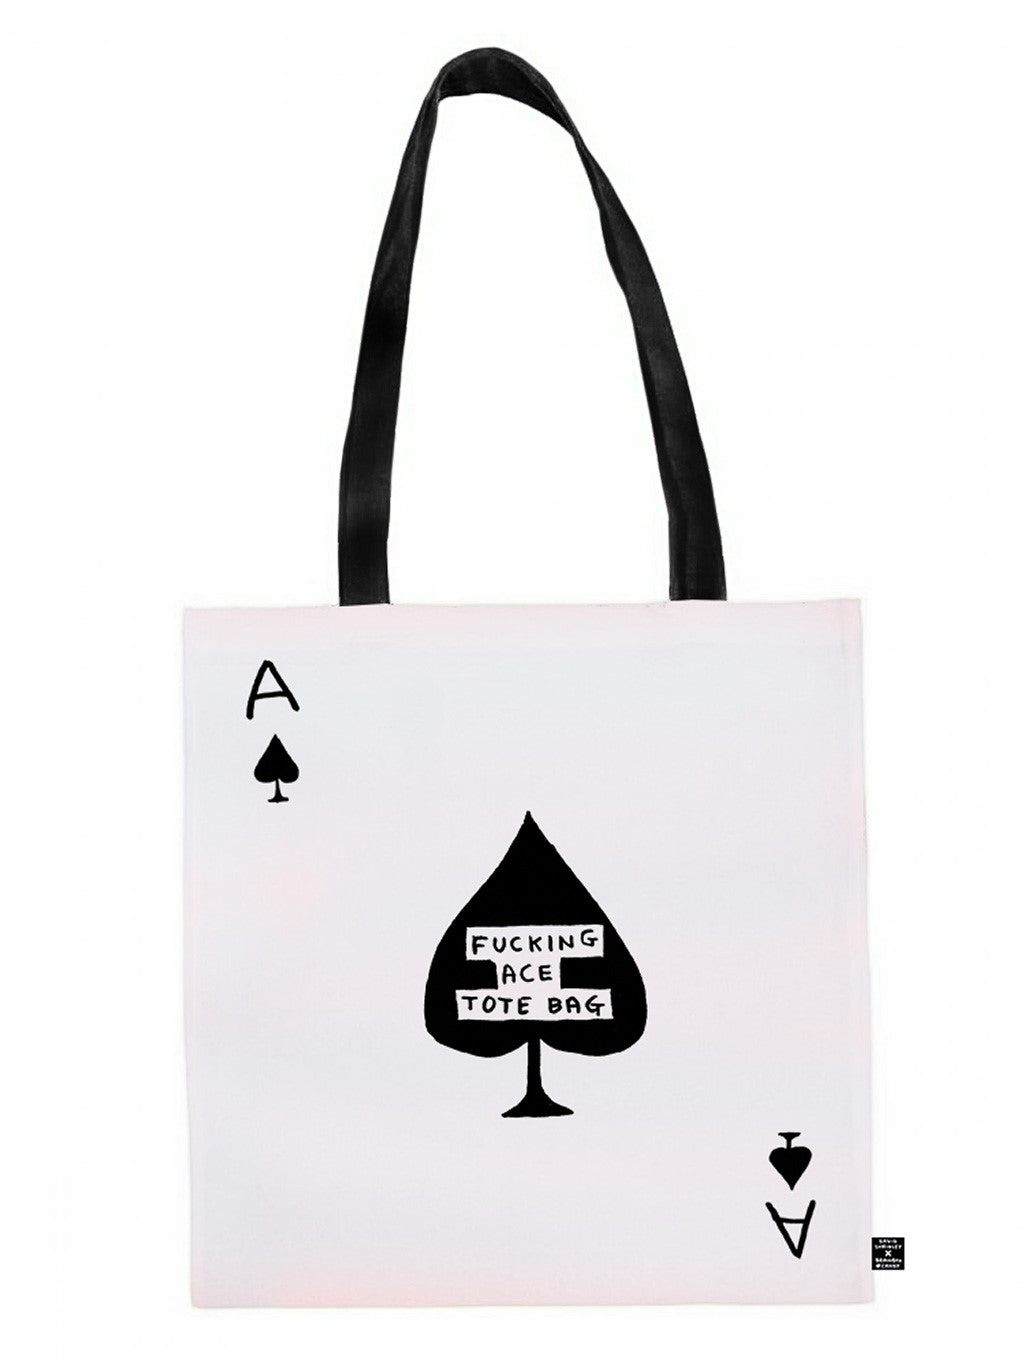 A white tote bag with black long handles extended upwards. The illustration mimics a black Ace card from a deck of playing cards but in the centre it says in back handwritten capital letters 'fucking ace tote bag'.